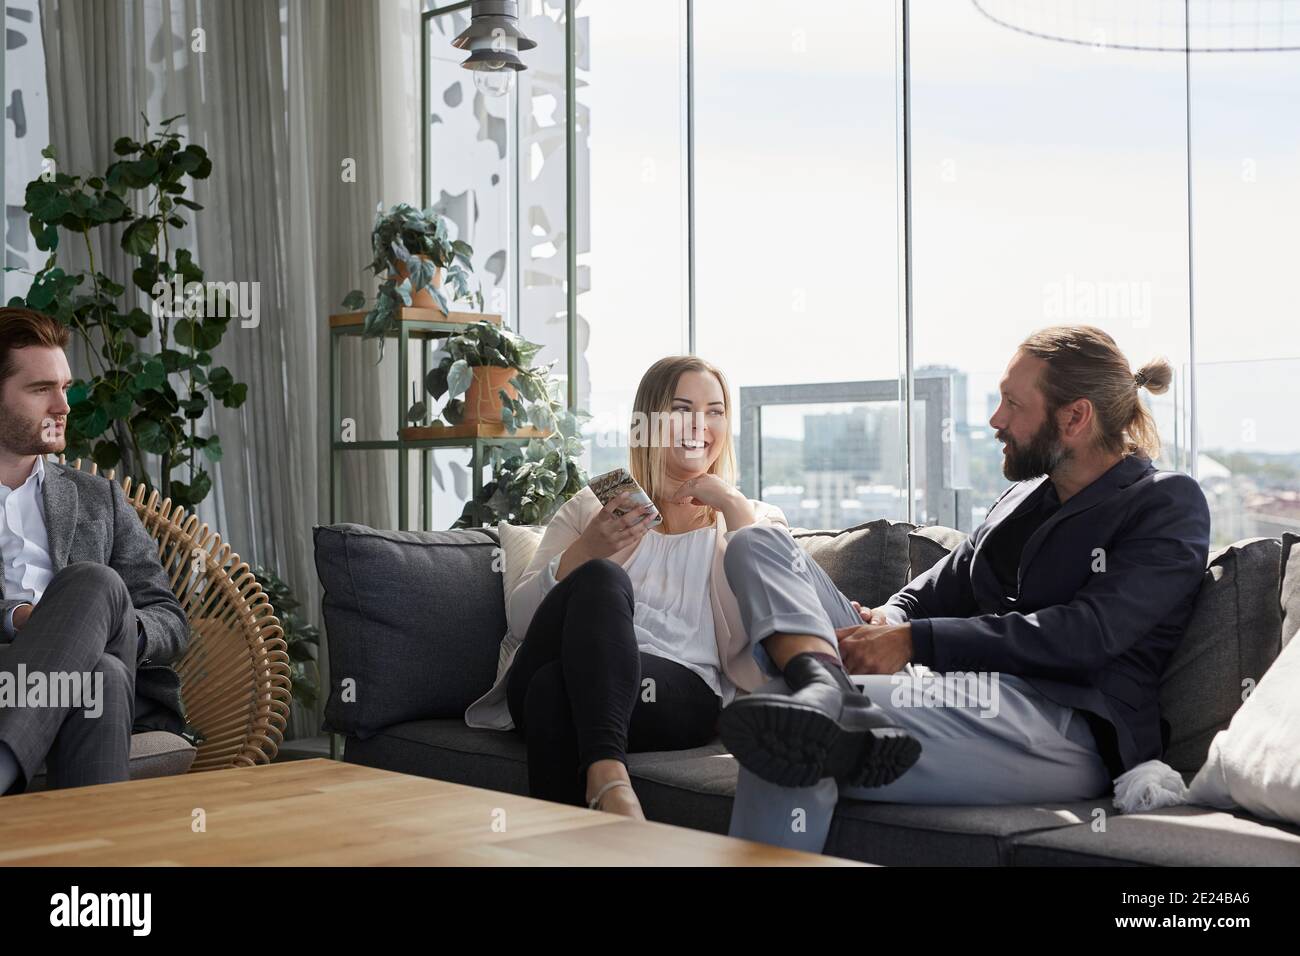 Coworkers talking on sofa Stock Photo